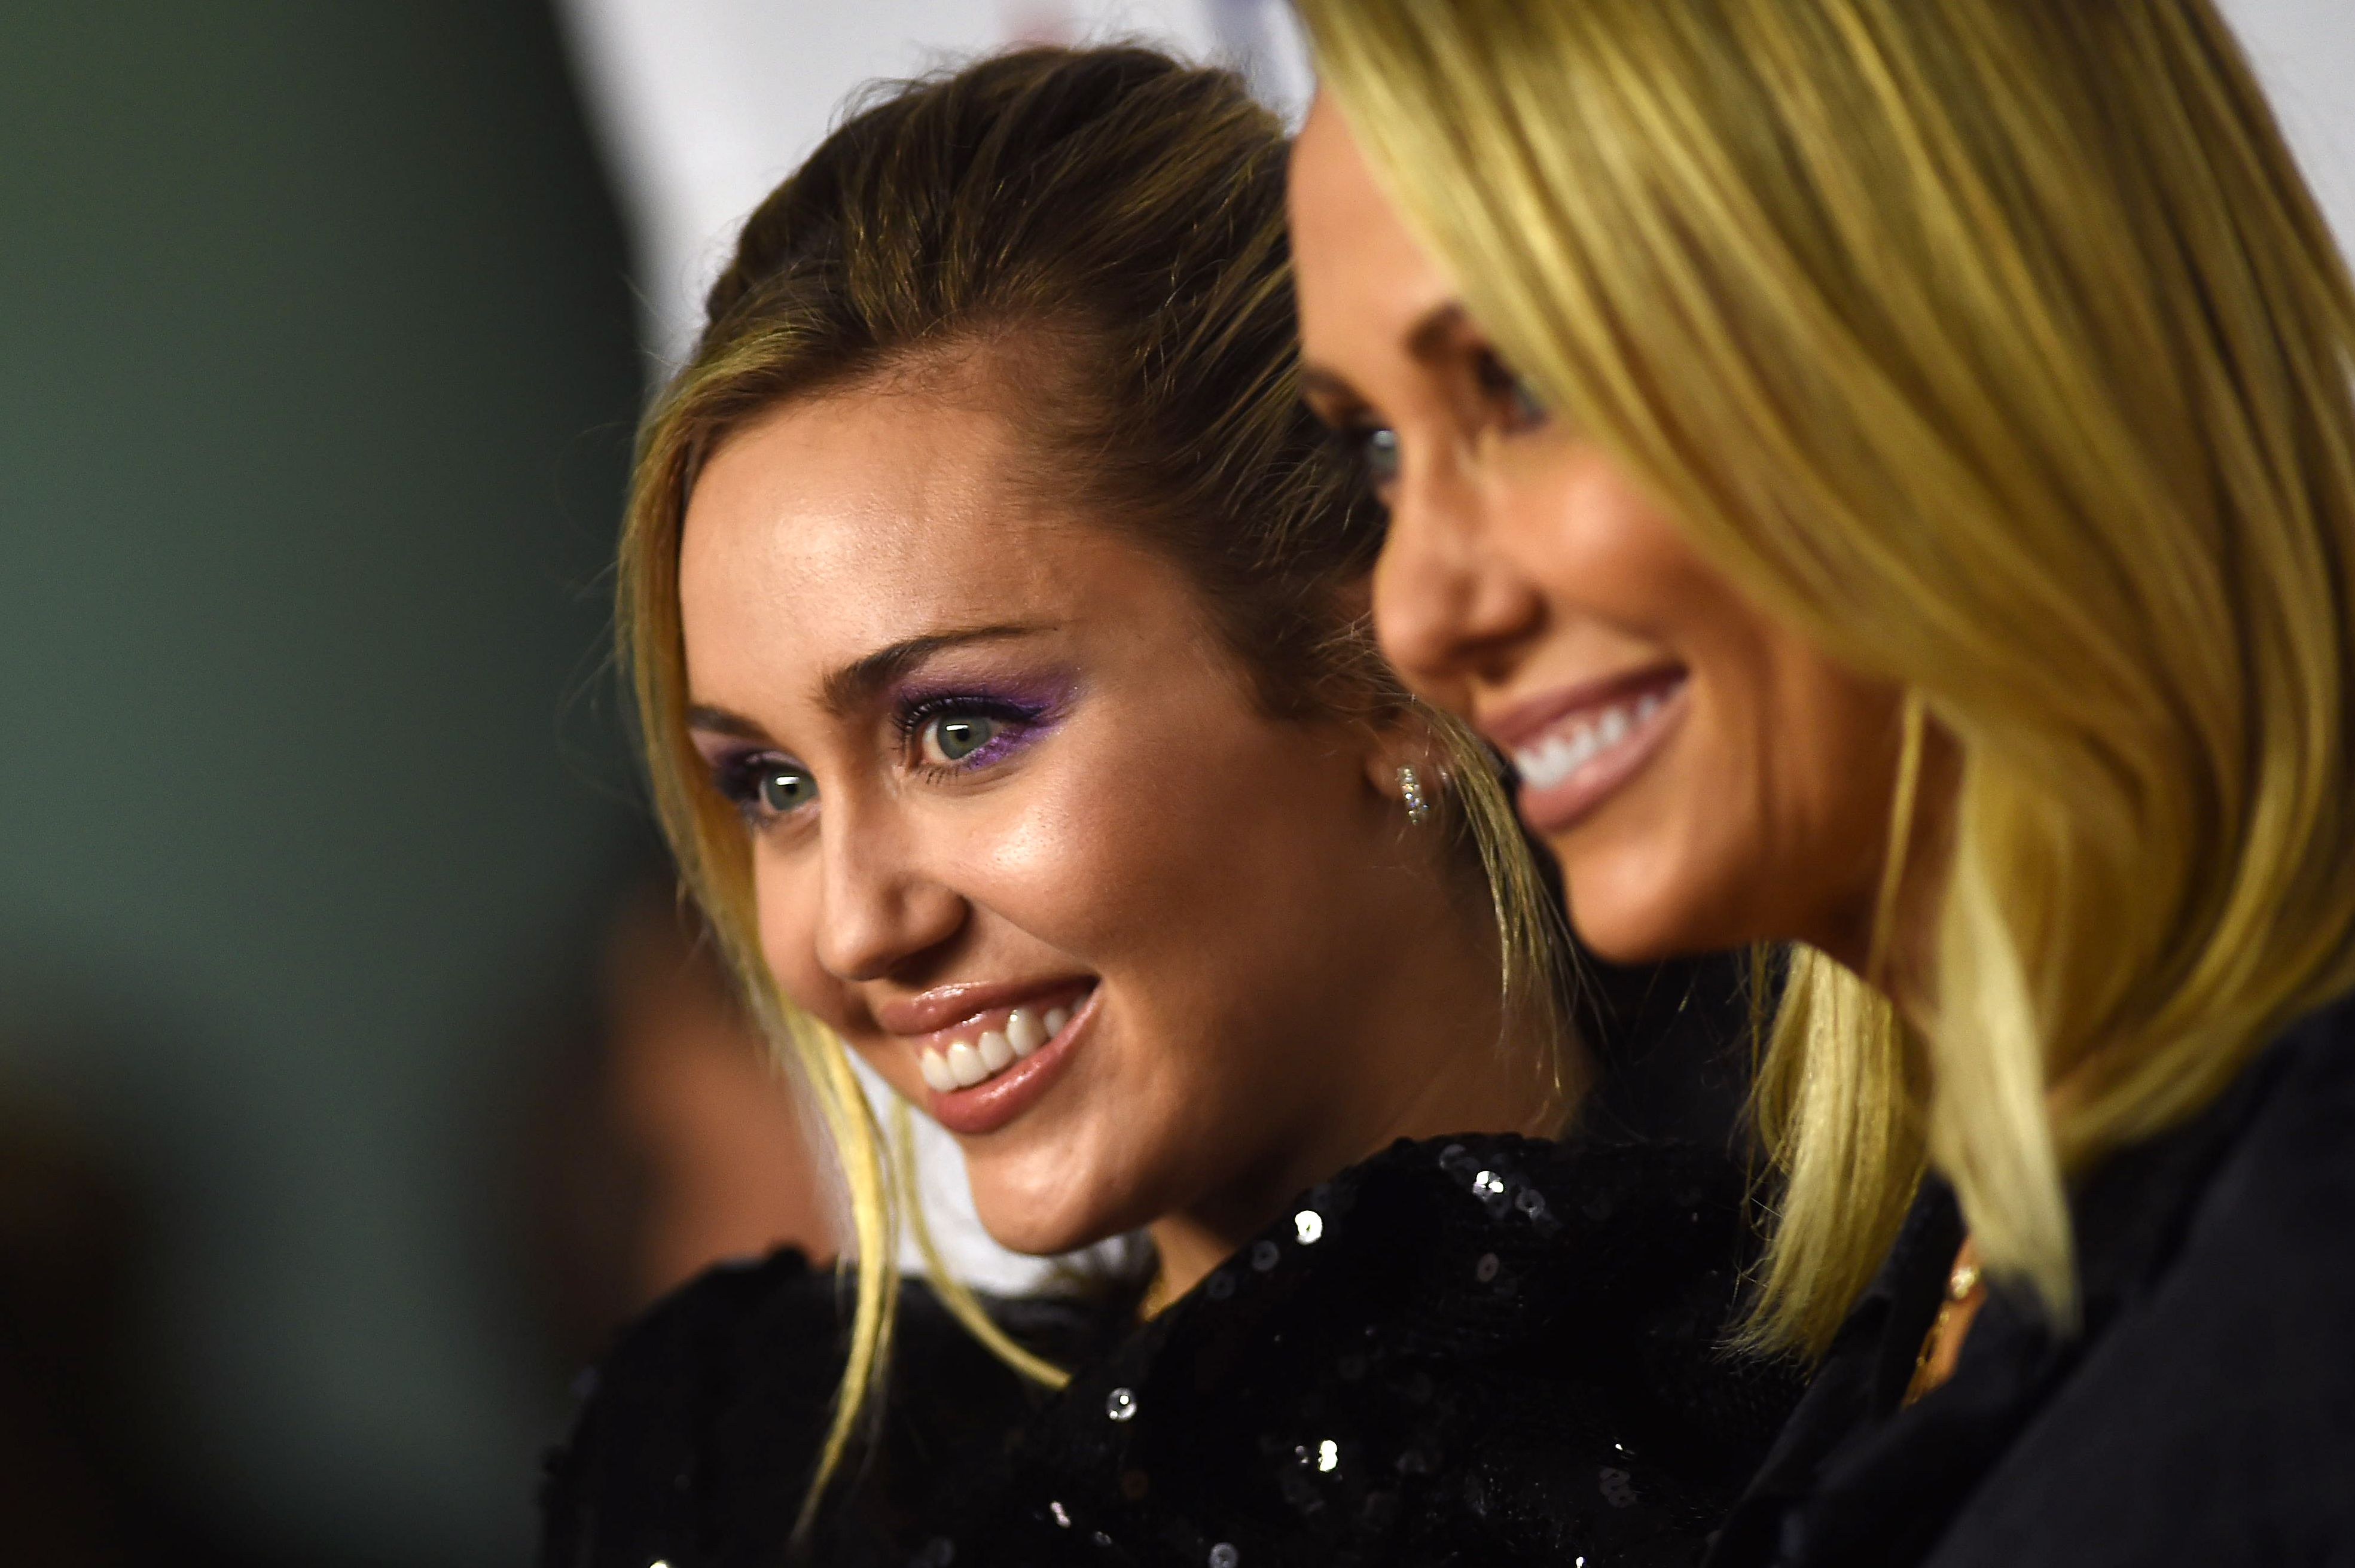 Miley Cyrus and Tish Cyrus as she arrives for the MusiCares Person Of The Year gala in Los Angeles on February 8, 2019. | Source: Getty Images